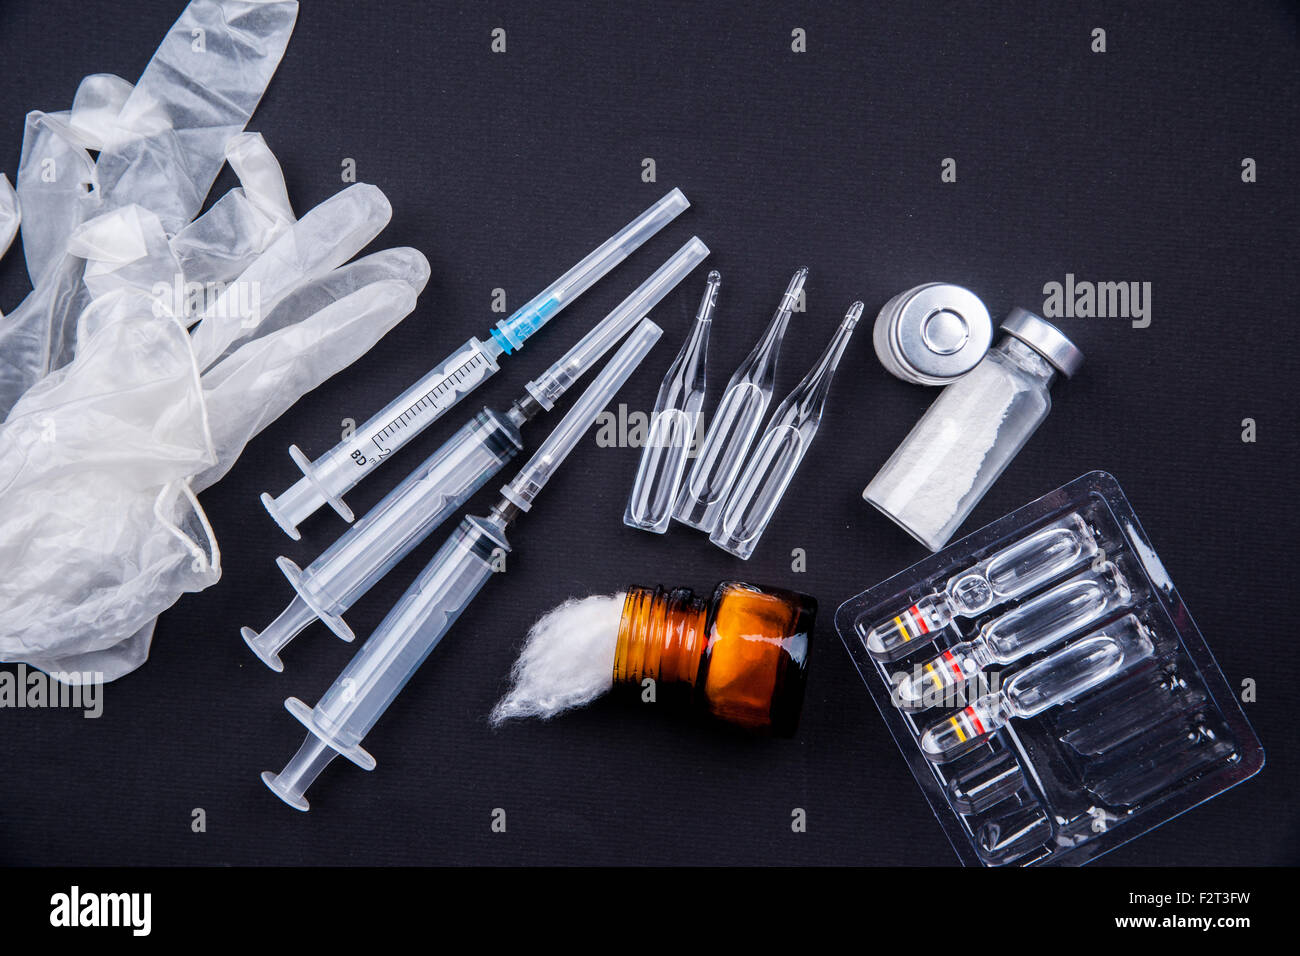 Medical objects Stock Photo